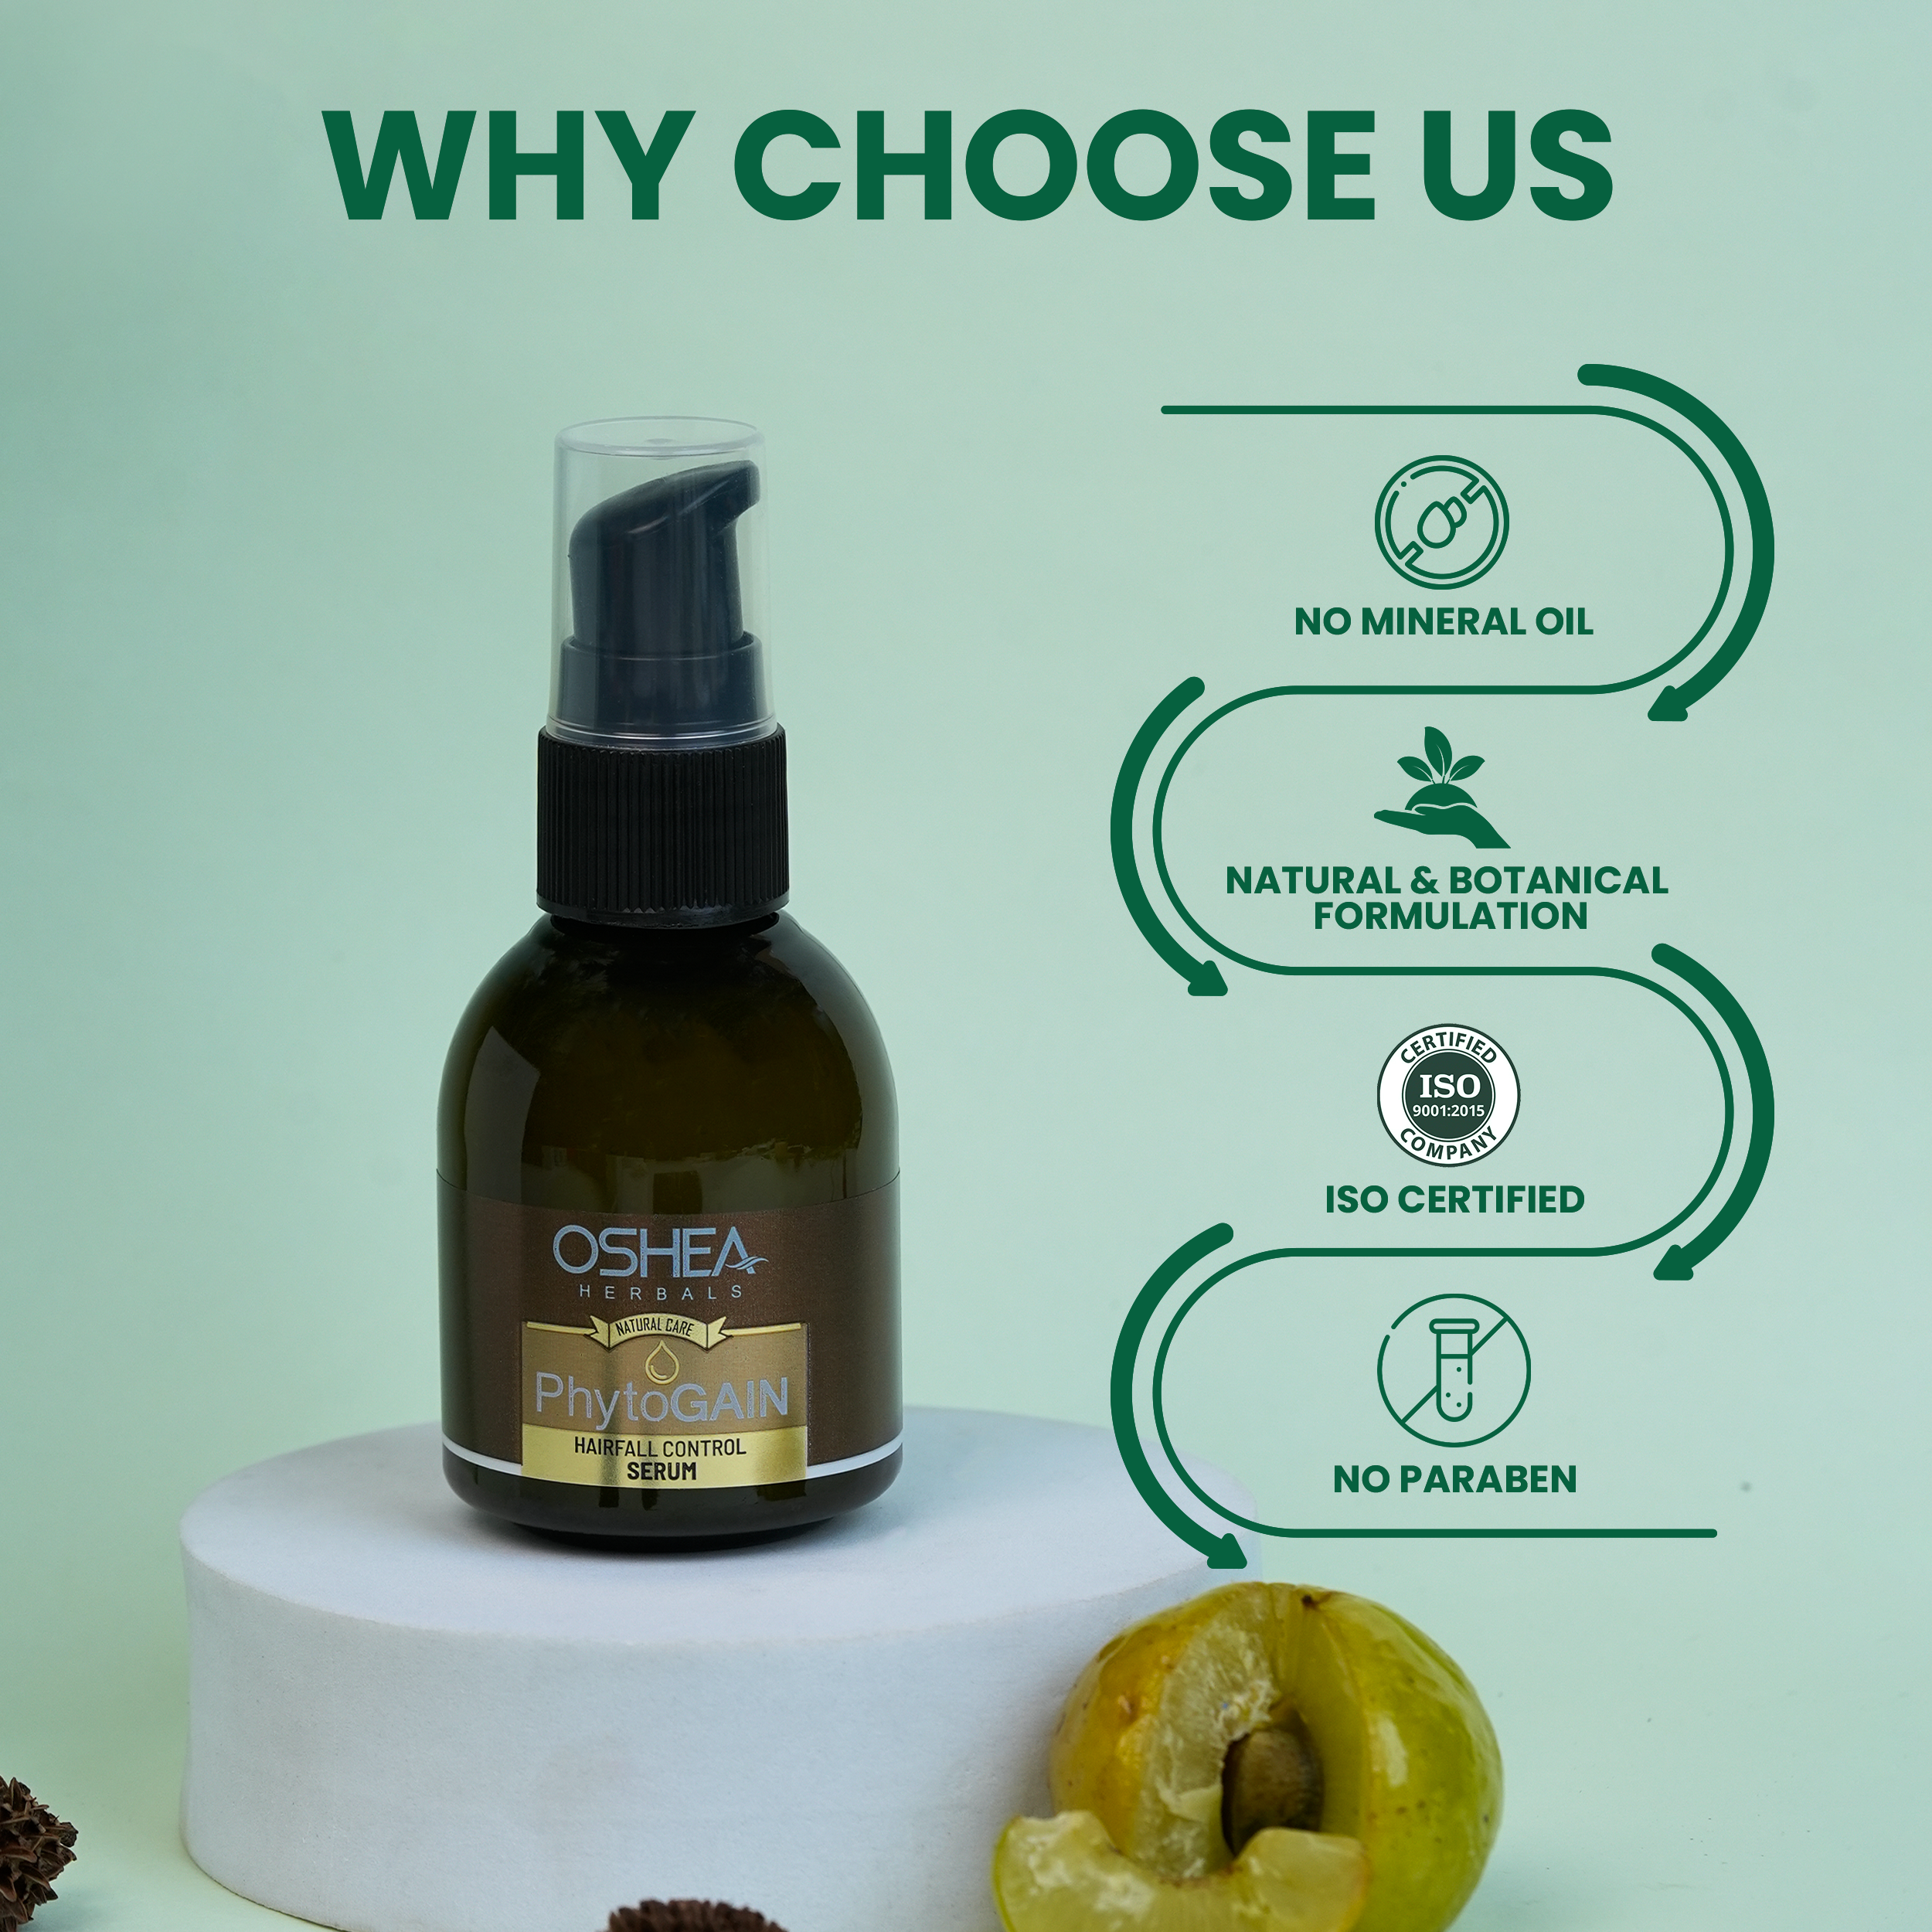 Why Choose Us Phytogain Smoother Hair Serum Oshea Herbals